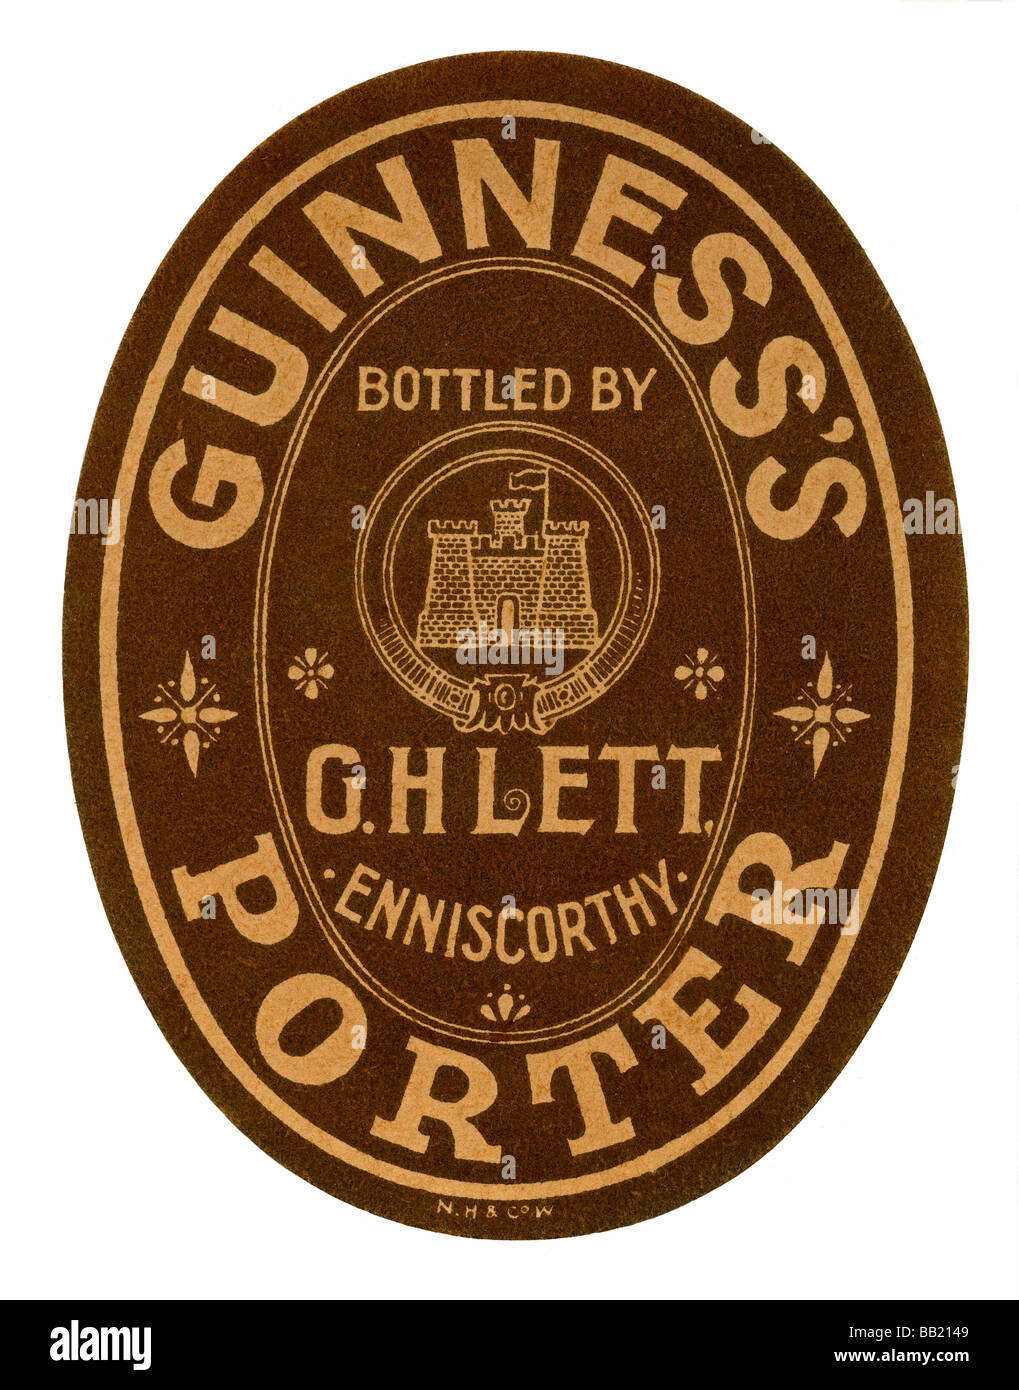 Old Guinness label for Porter, bottled by Lett Brewery of Enniscorthy, Ireland Stock Photo